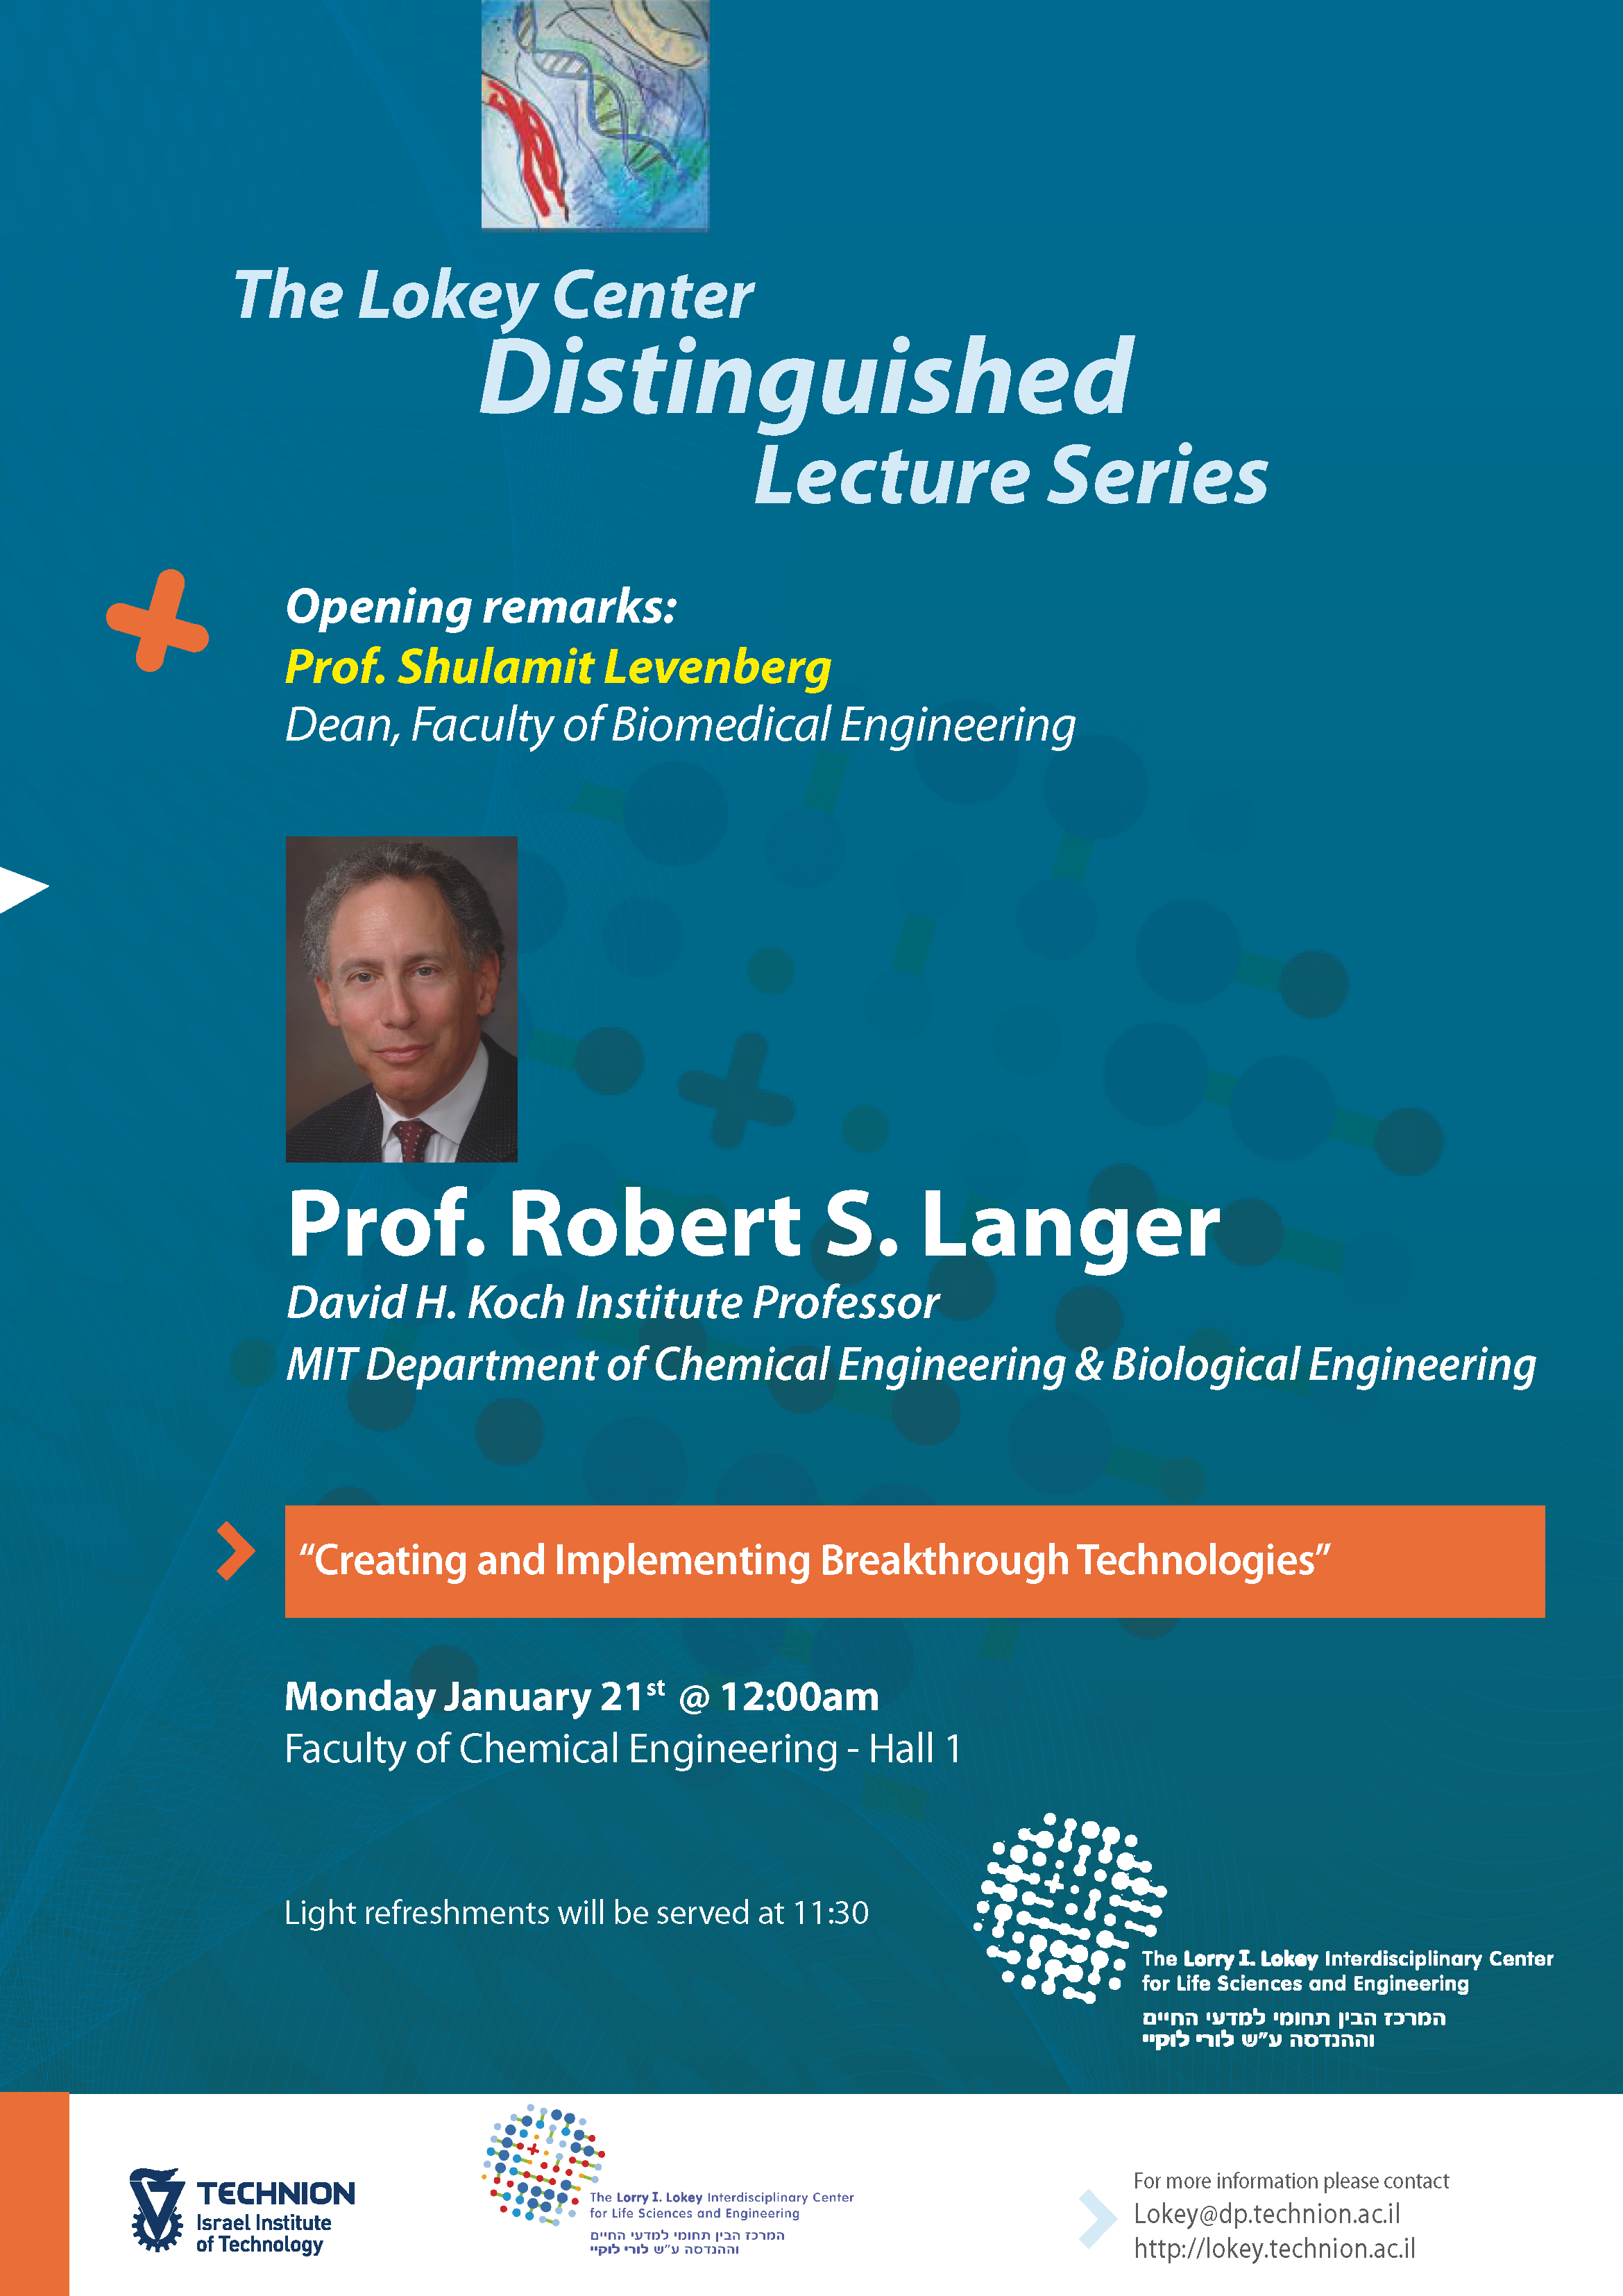 Poster of Prof Langer lecture